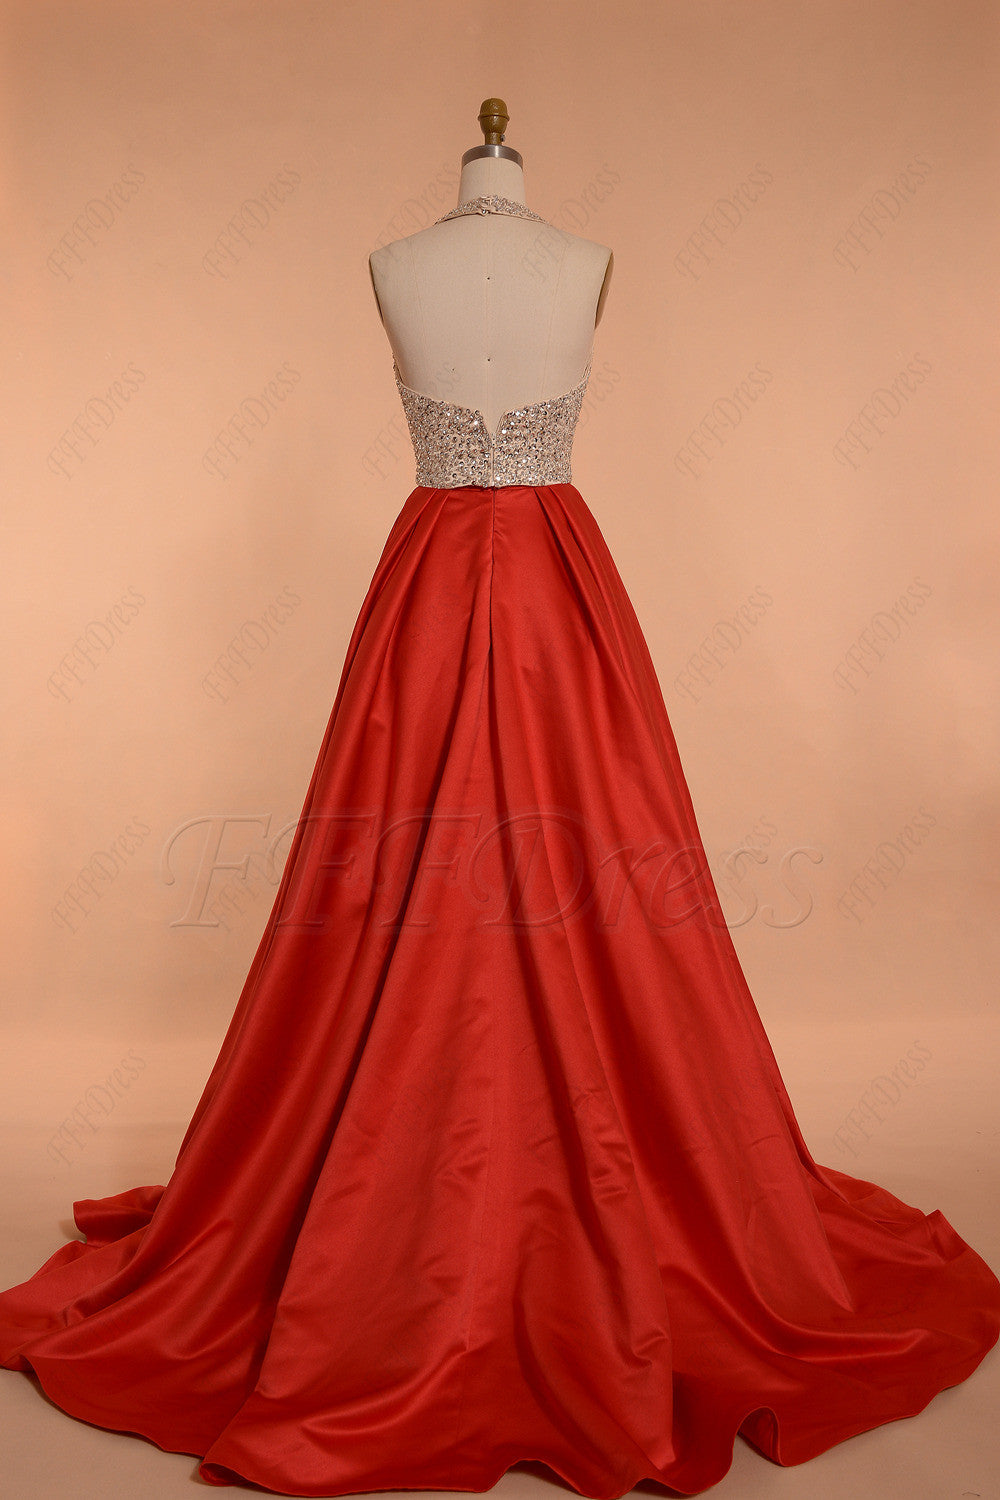 Sparkly Ball Gown red prom dresses long halter prom gown